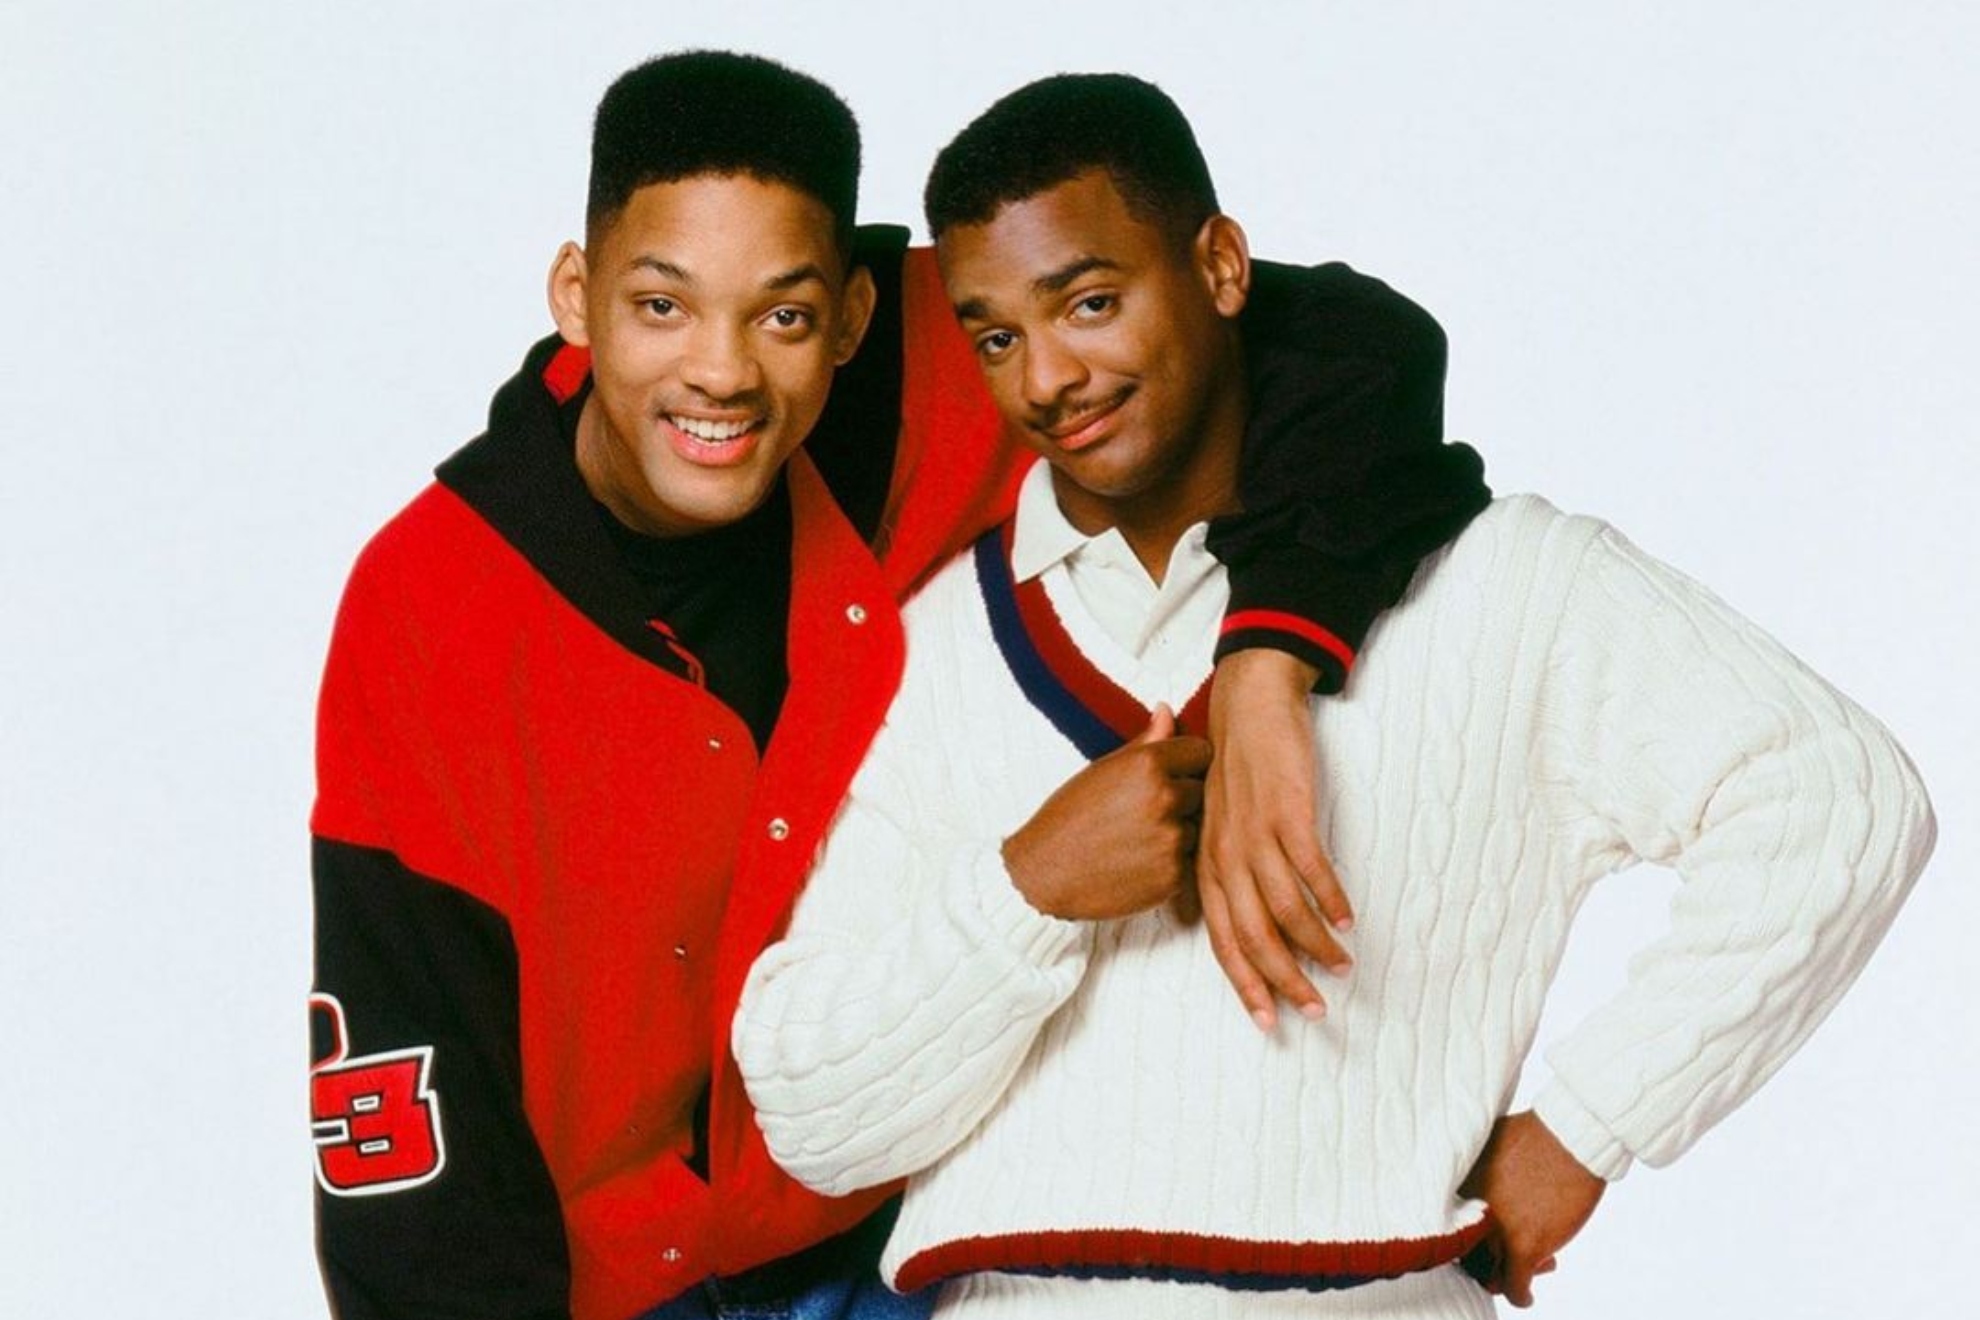 What happened to Alfonso Ribeiro, the actor who played Carlton Banks in 'The Fresh Prince of Bel-Air' and the 'cousin' of Will Smith?